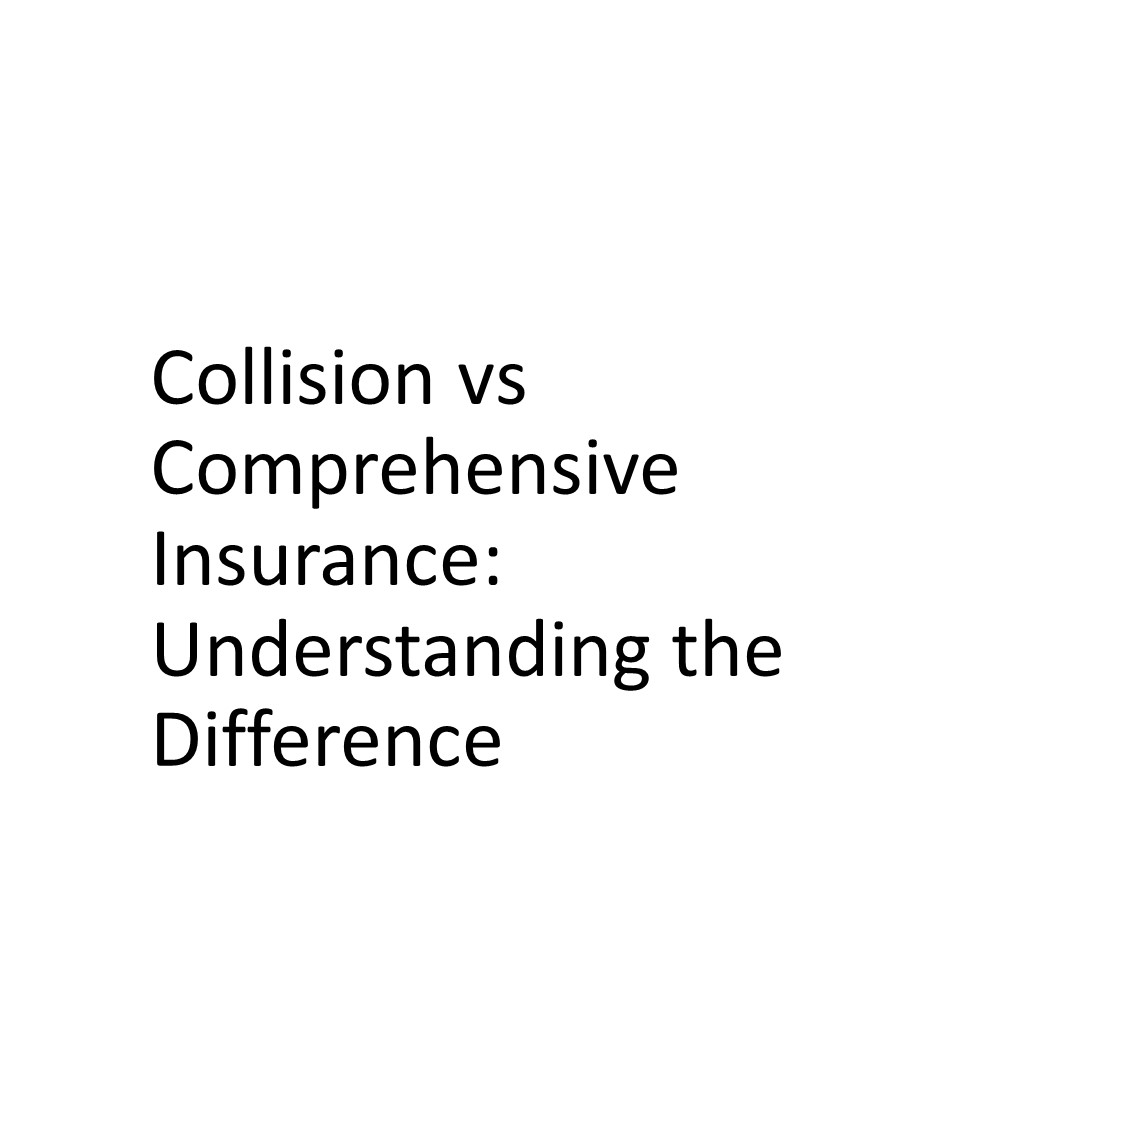 Collision vs Comprehensive Insurance: Understanding the Difference